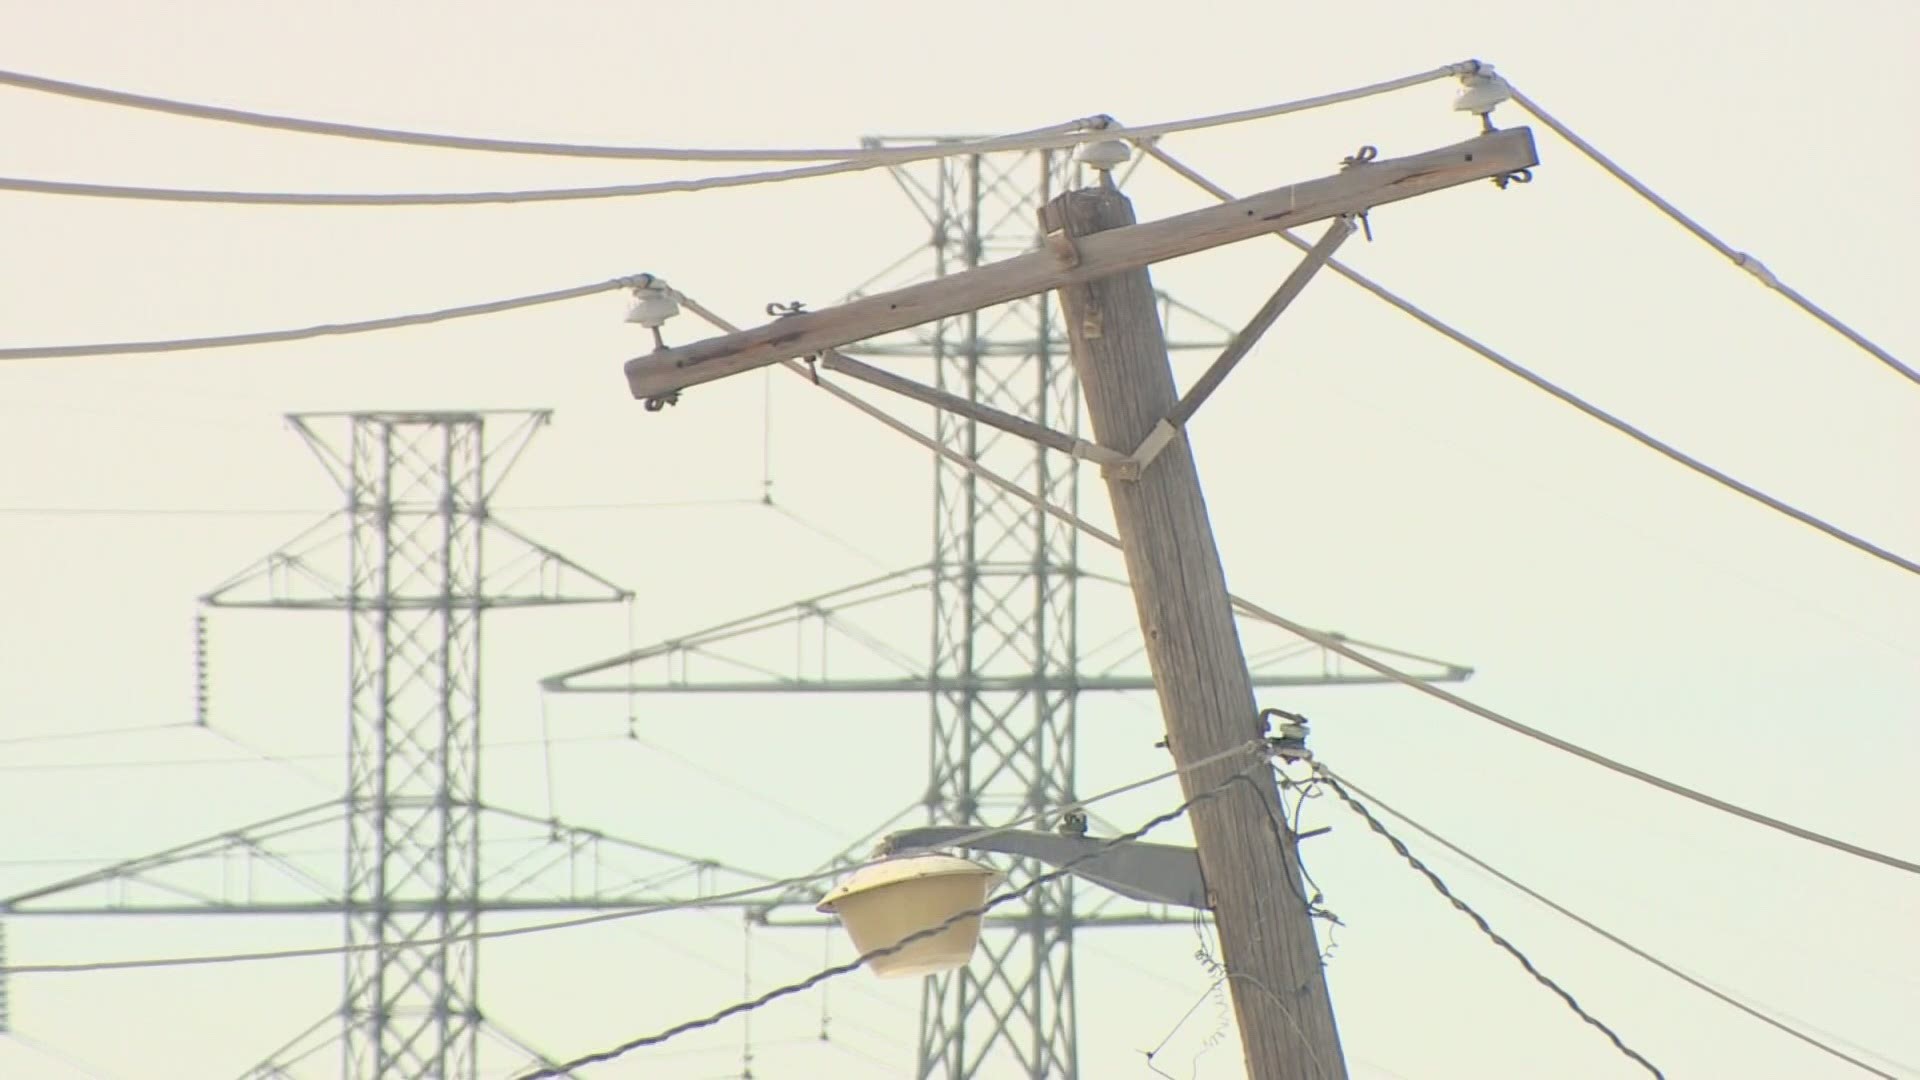 At least three state lawmakers have written letters to the Public Utility Commission of Texas